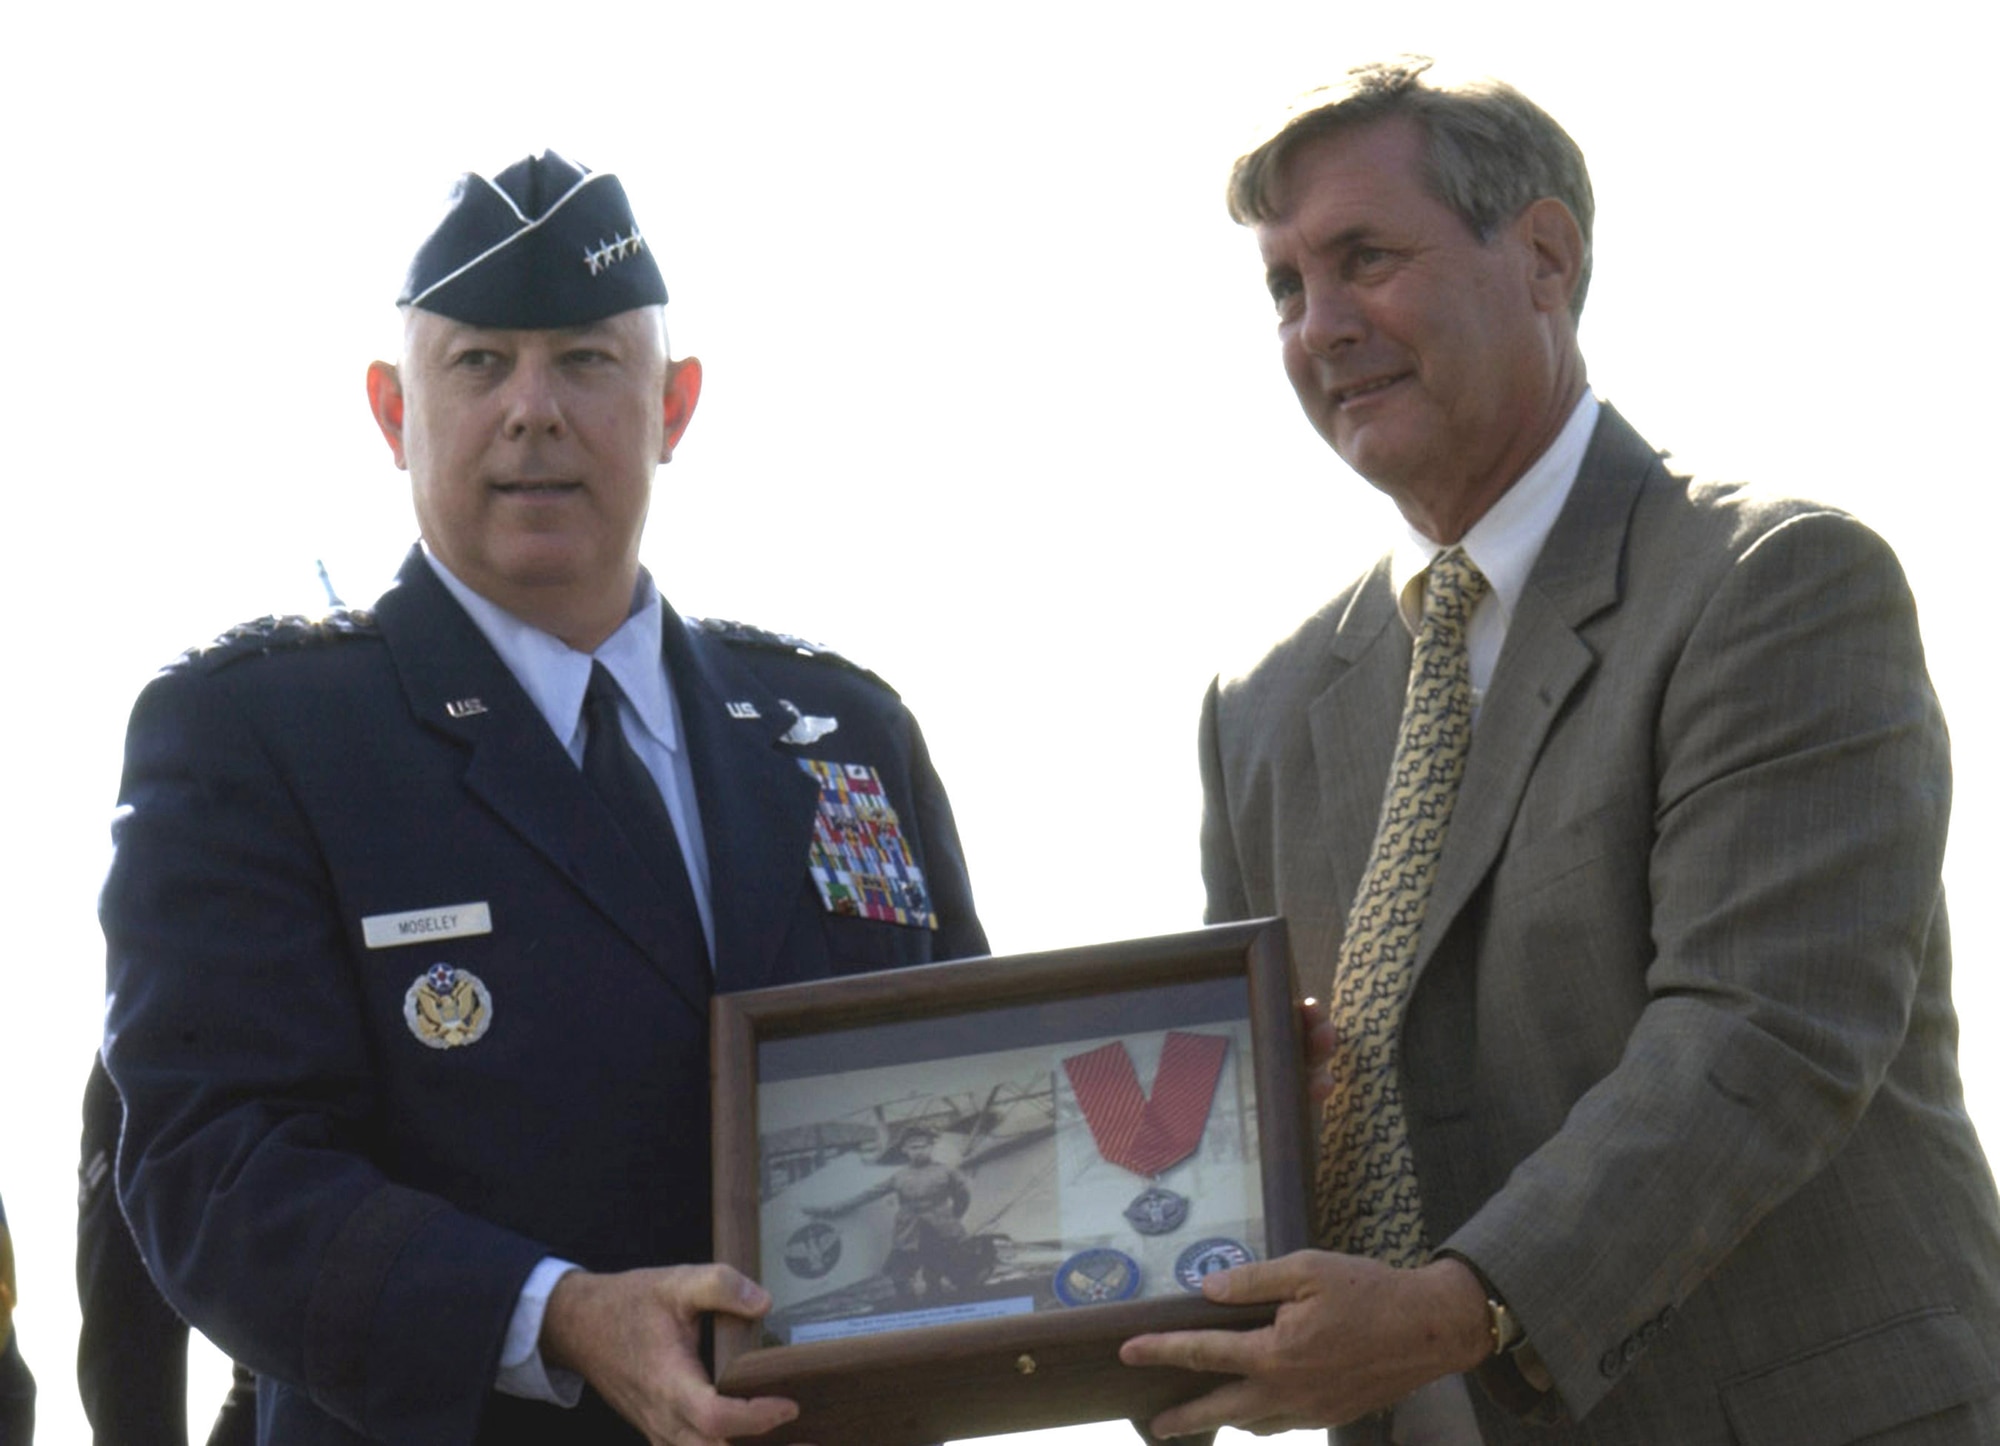 Air Force Chief of Staff T. Michael Moseley hands a shadowbox of the Air Force Combat Action Medal to Tom Gilpin, the grandson of Air Force pioneer Brig. Gen. William "Billy" Mitchell, June 12 in Arlington, Va. The AFCAM takes its design from the markings on General Mitchell's aircraft and medal was designed for Airmen who have been directly in harm's way, engaging enemy forces. The decoration is the first of its kind for the Air Force. (U.S. Air Force photo/Staff Sgt. J.G. Buzanowski)